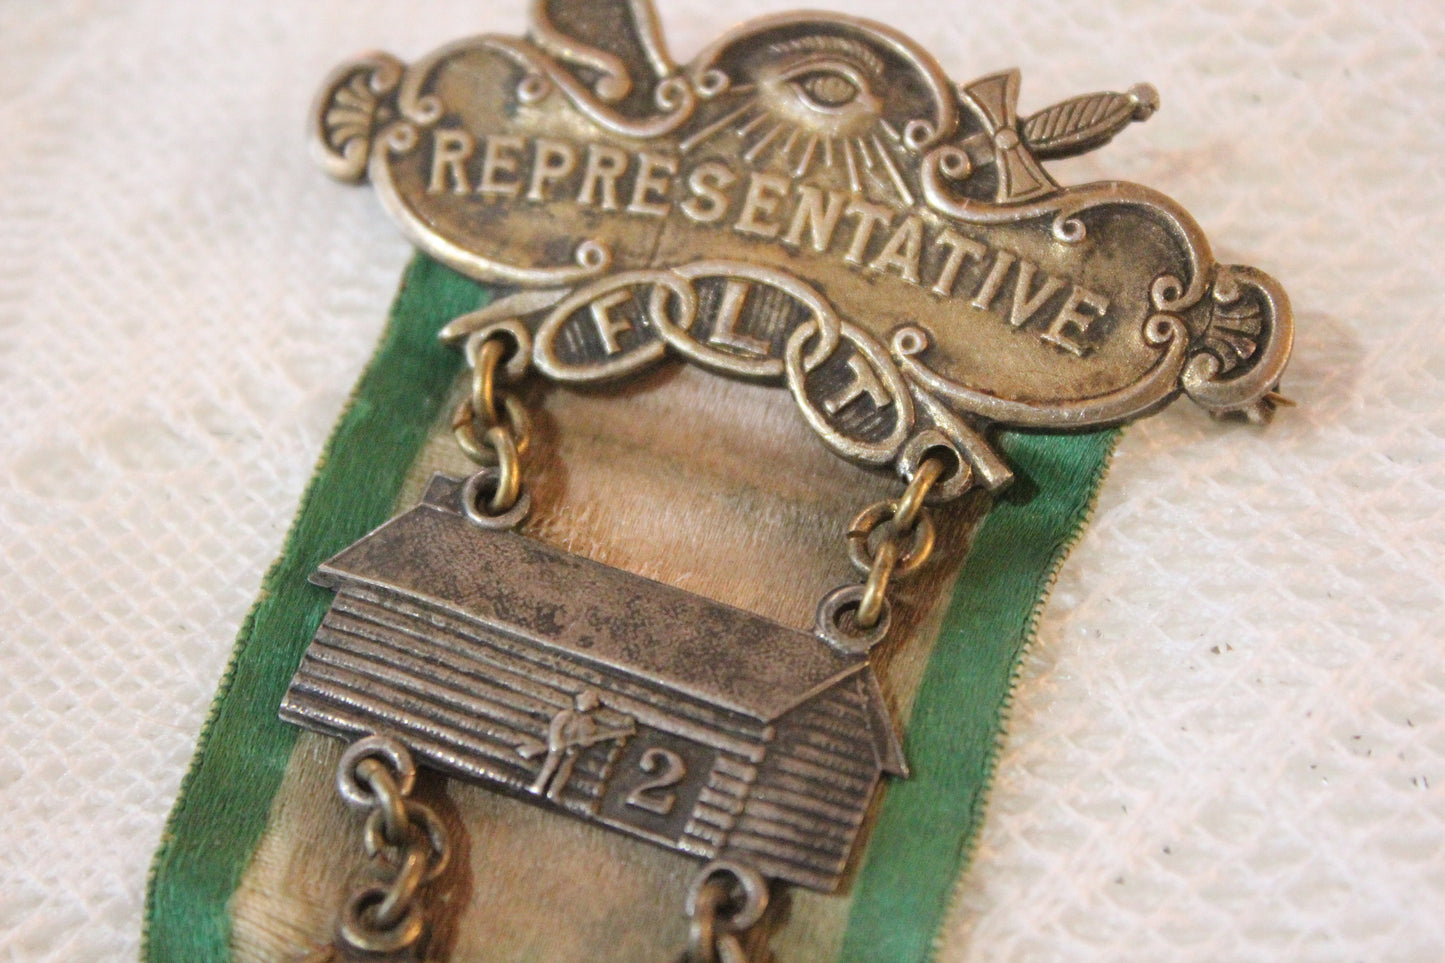 IOOF Independant Order of Odd Fellows Representative Medal with Green and White Ribbon, 1913